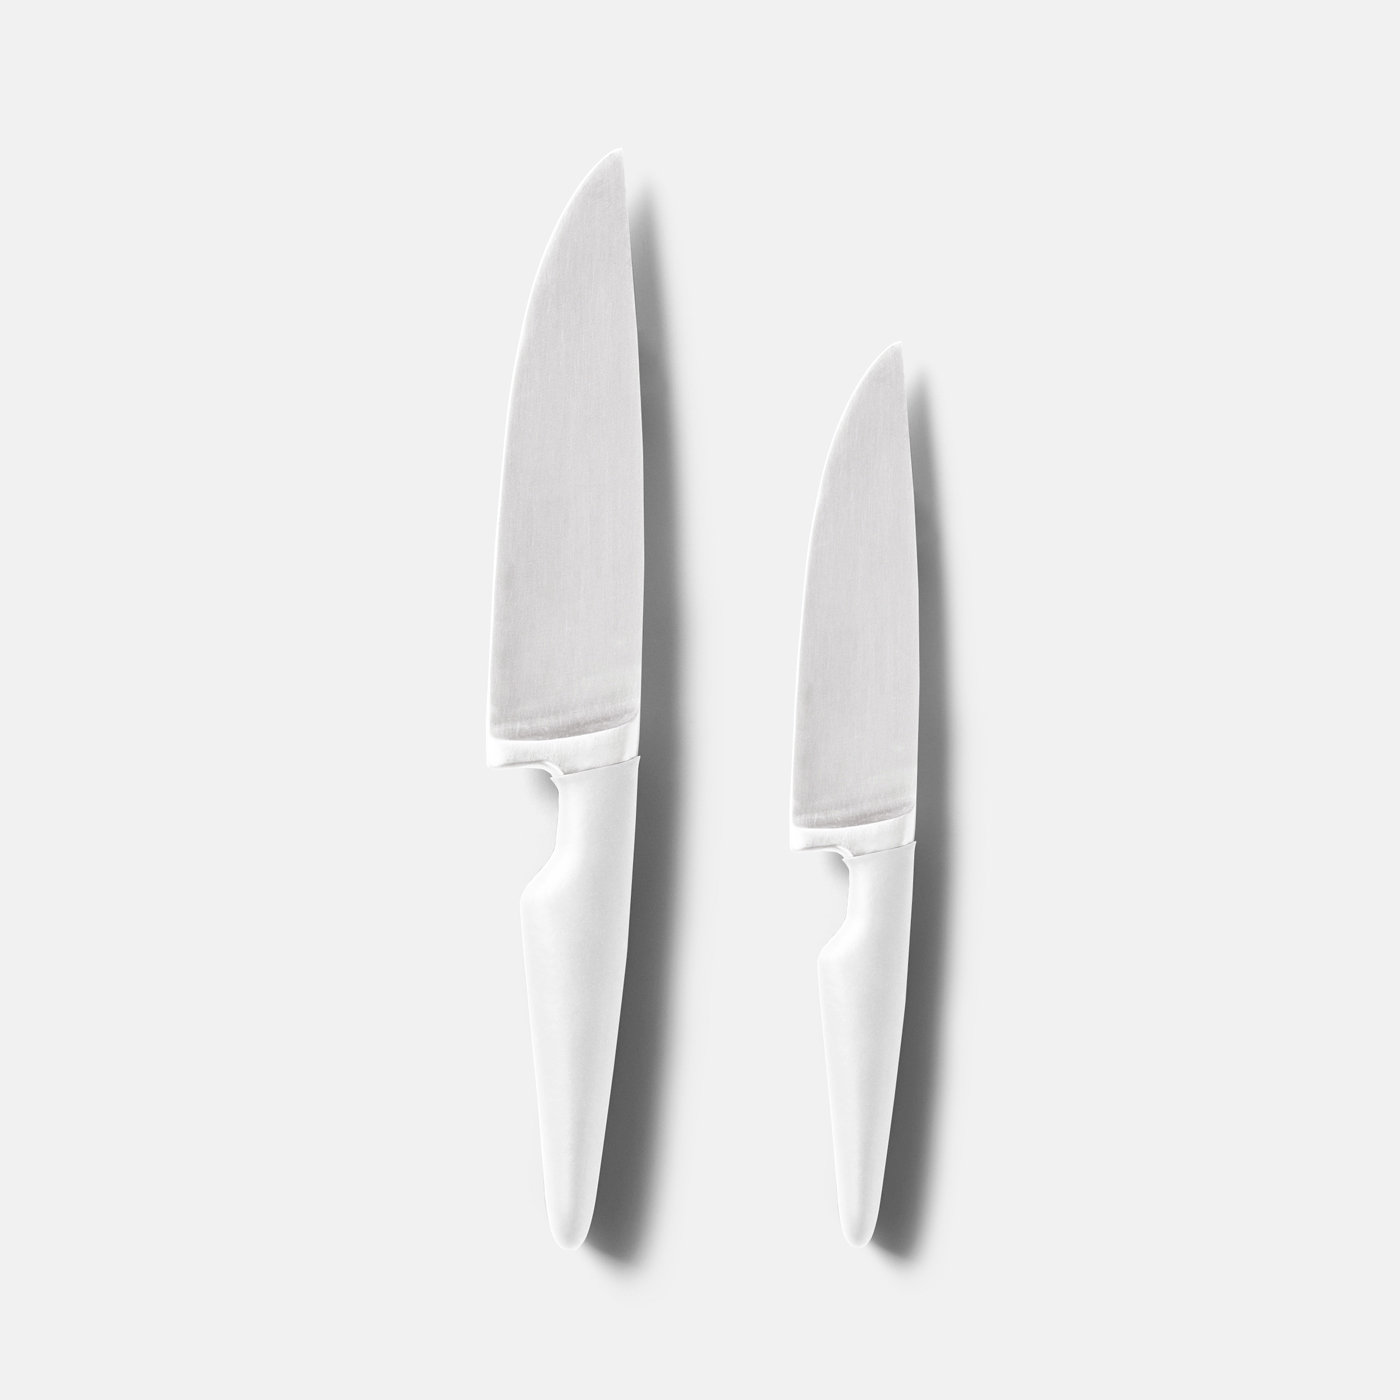 Top View of Realistic Double Kitchen Knifes Mockup FREE PSD